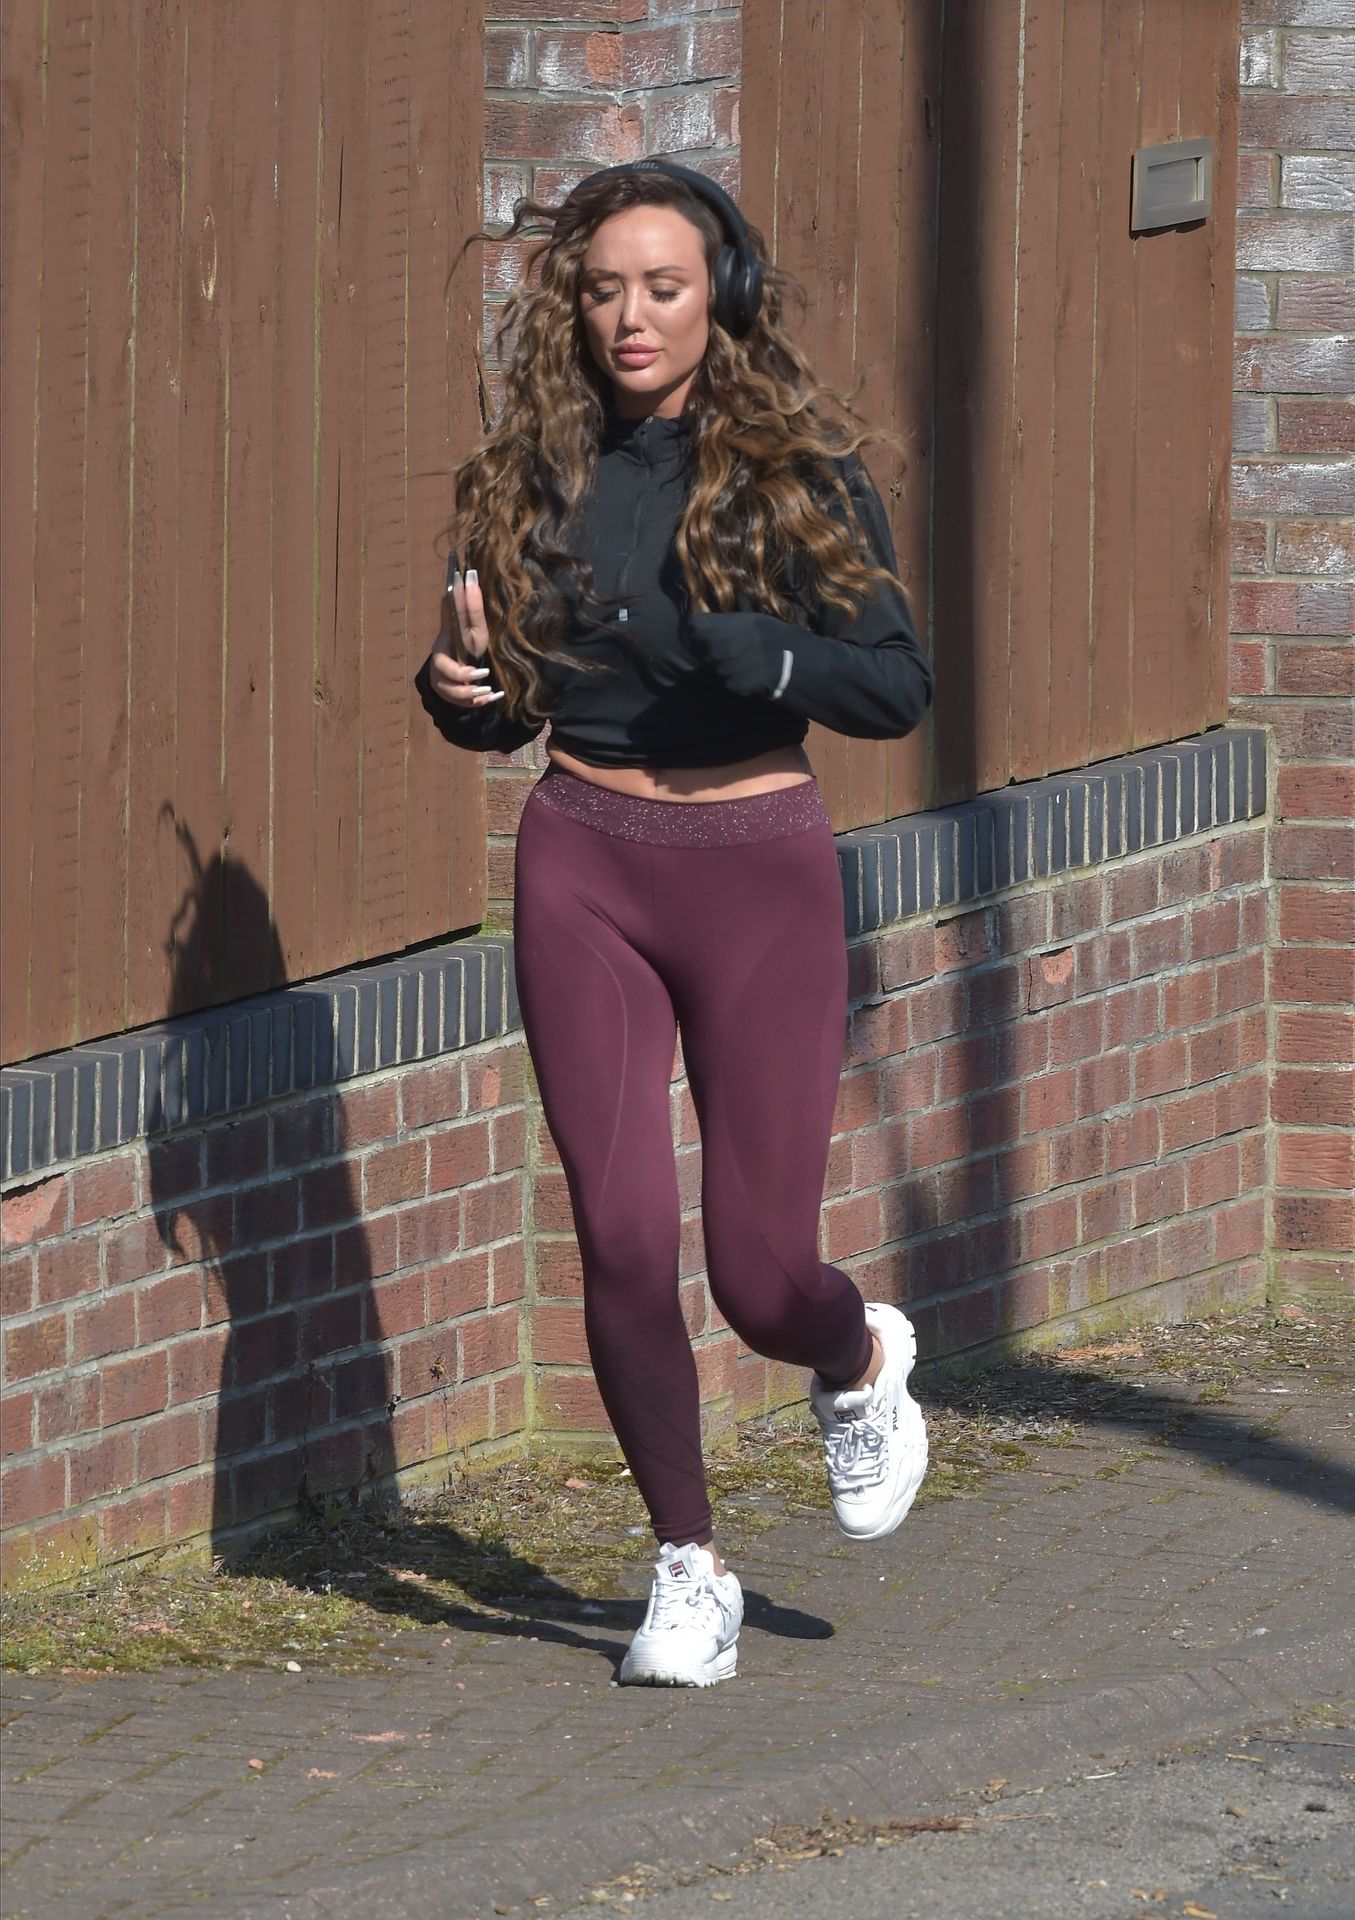 Charlotte Crosby Pictured While Jogging 0005